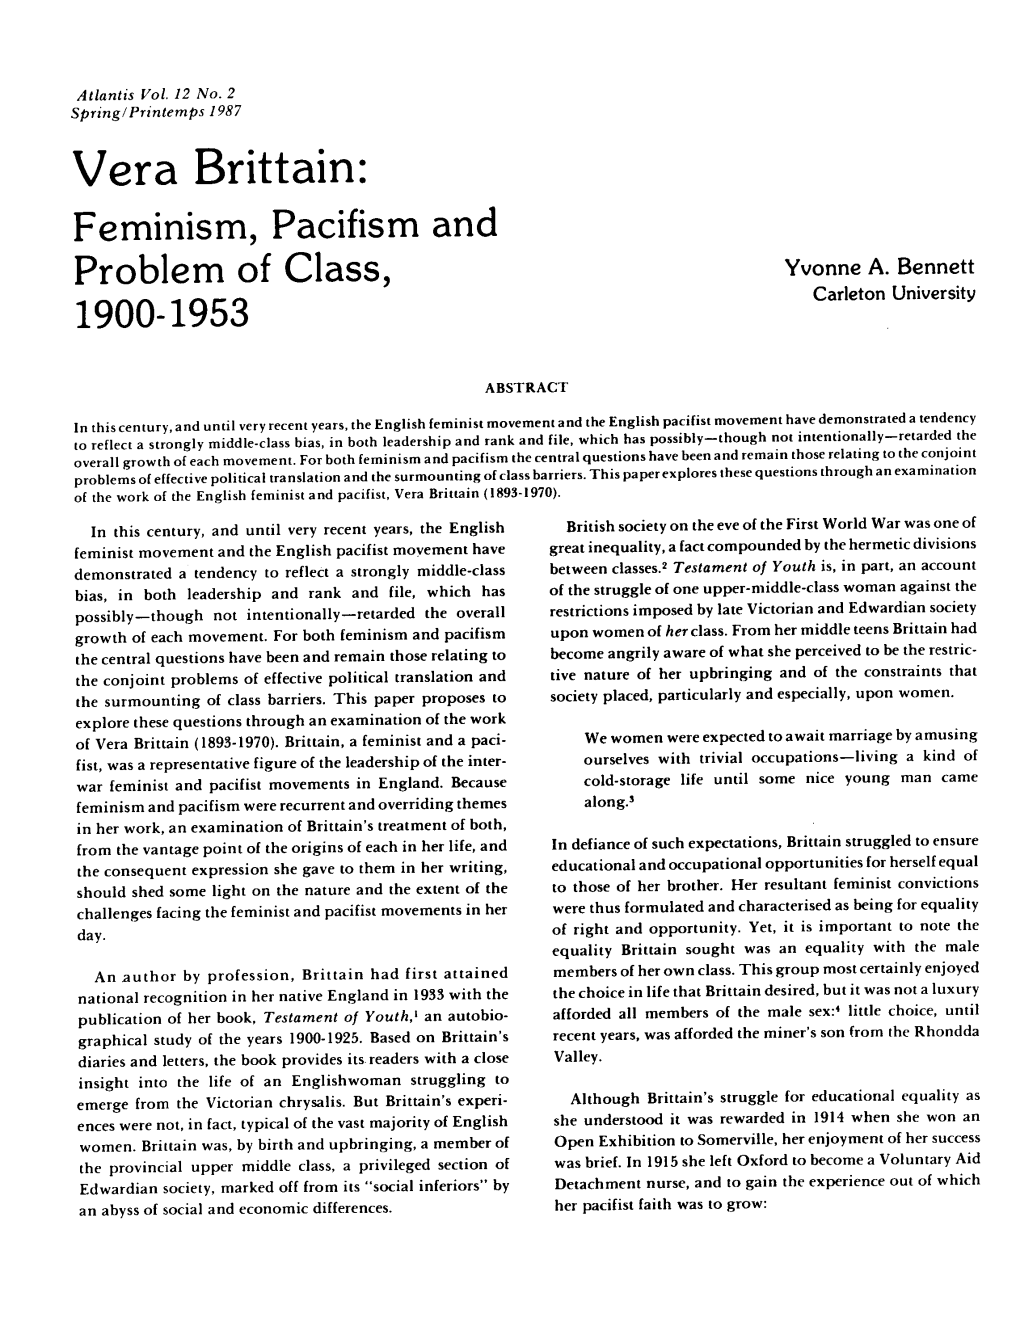 Vera Brittain: Feminism, Pacifism and Problem of Class, Yvonne A